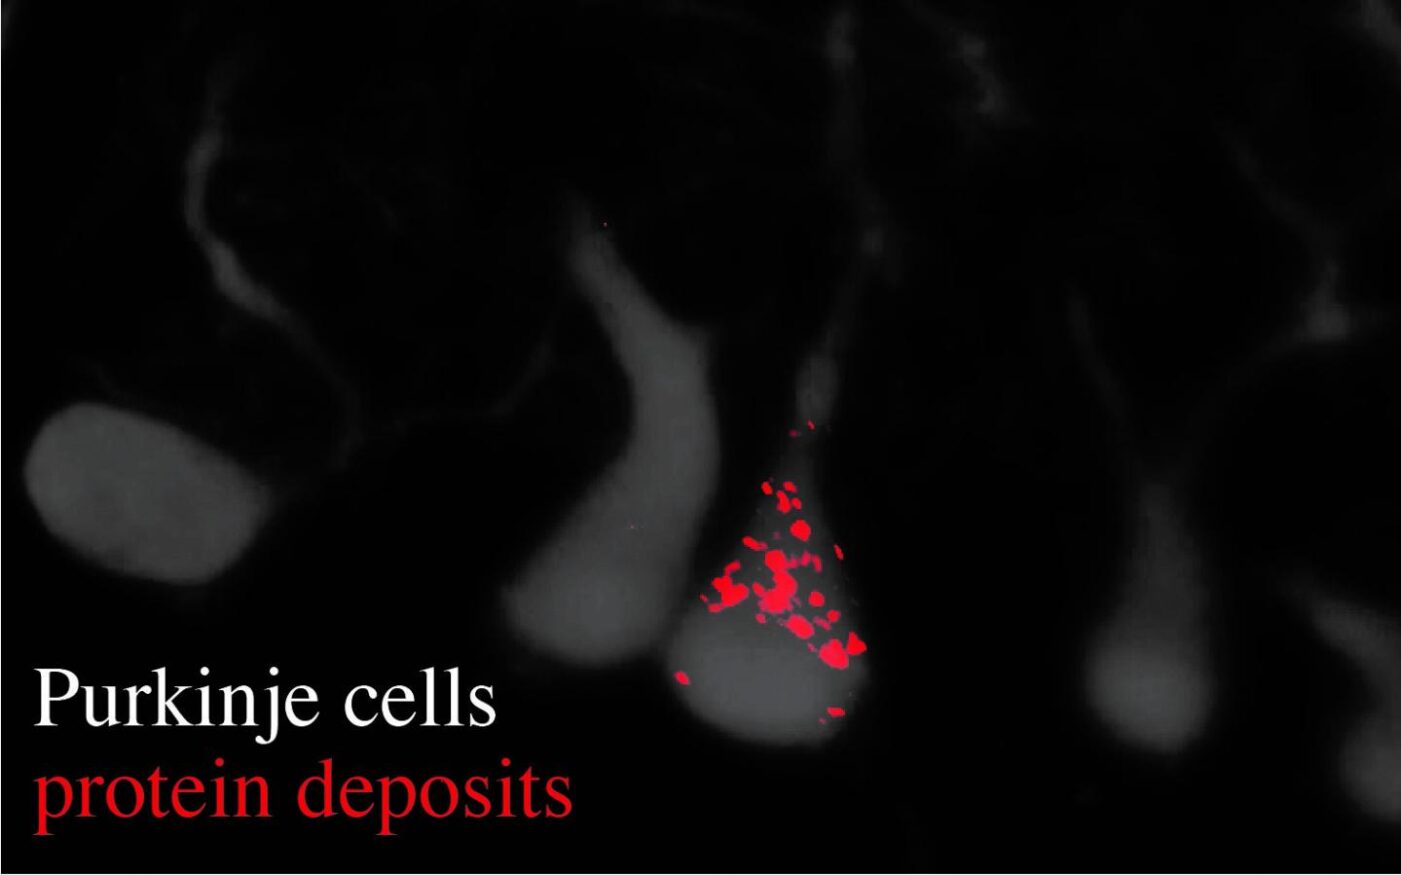 Image reveals Purkinje cells (gray) and their dendrites, as well as an accumulation of protein deposits (red dots). [Ackerman Lab/UC San Diego]